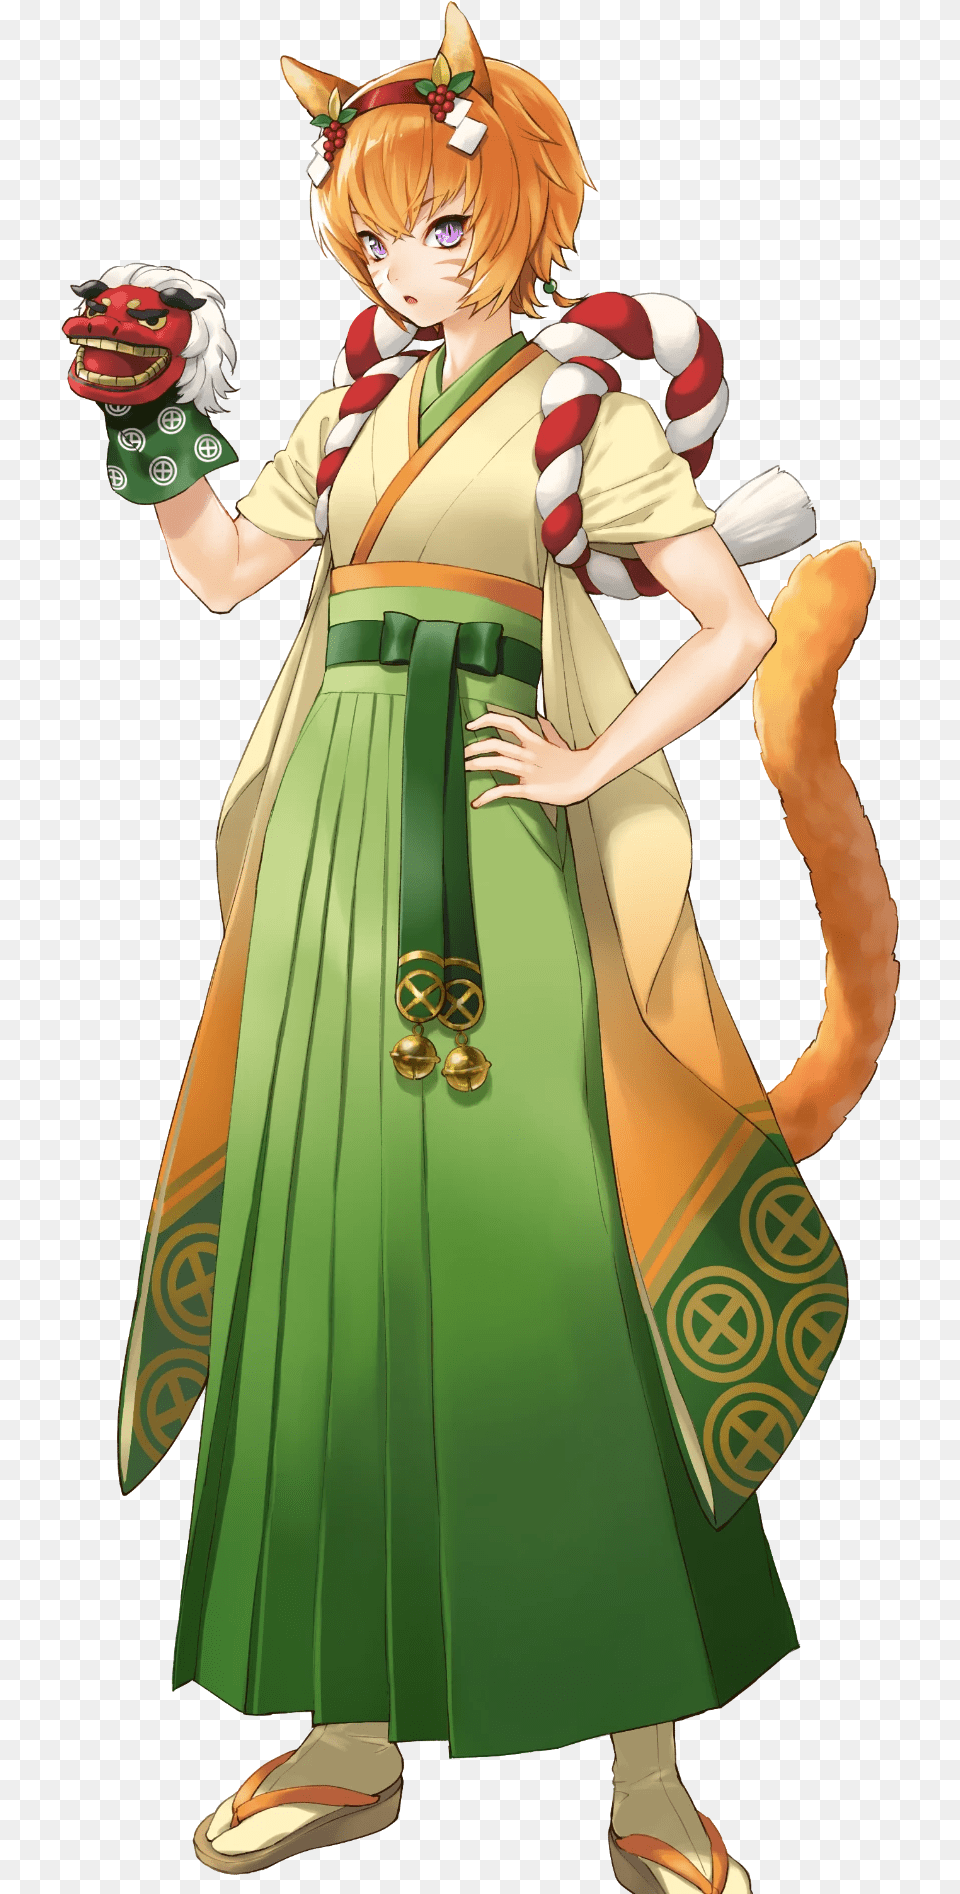 Filelethe New Years Claw Facewebp Fire Emblem Heroes Wiki Lethe Fire Emblem Heroes, Publication, Book, Clothing, Comics Free Png Download